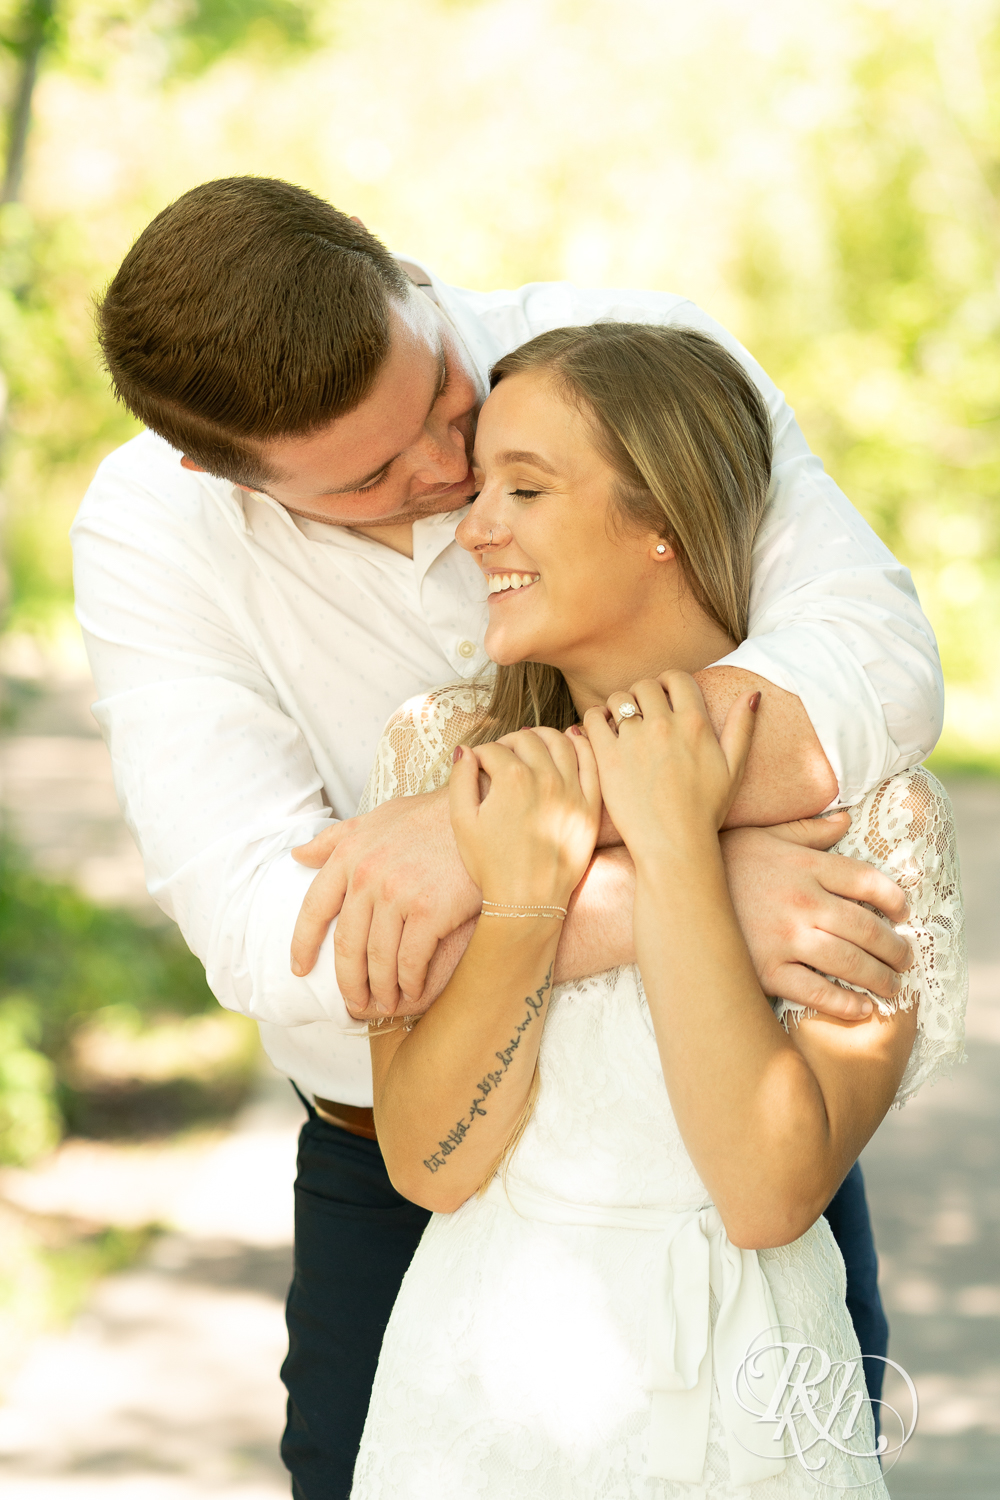 Man and woman dressed in white snuggle during summer engagement photography in Minnesota.